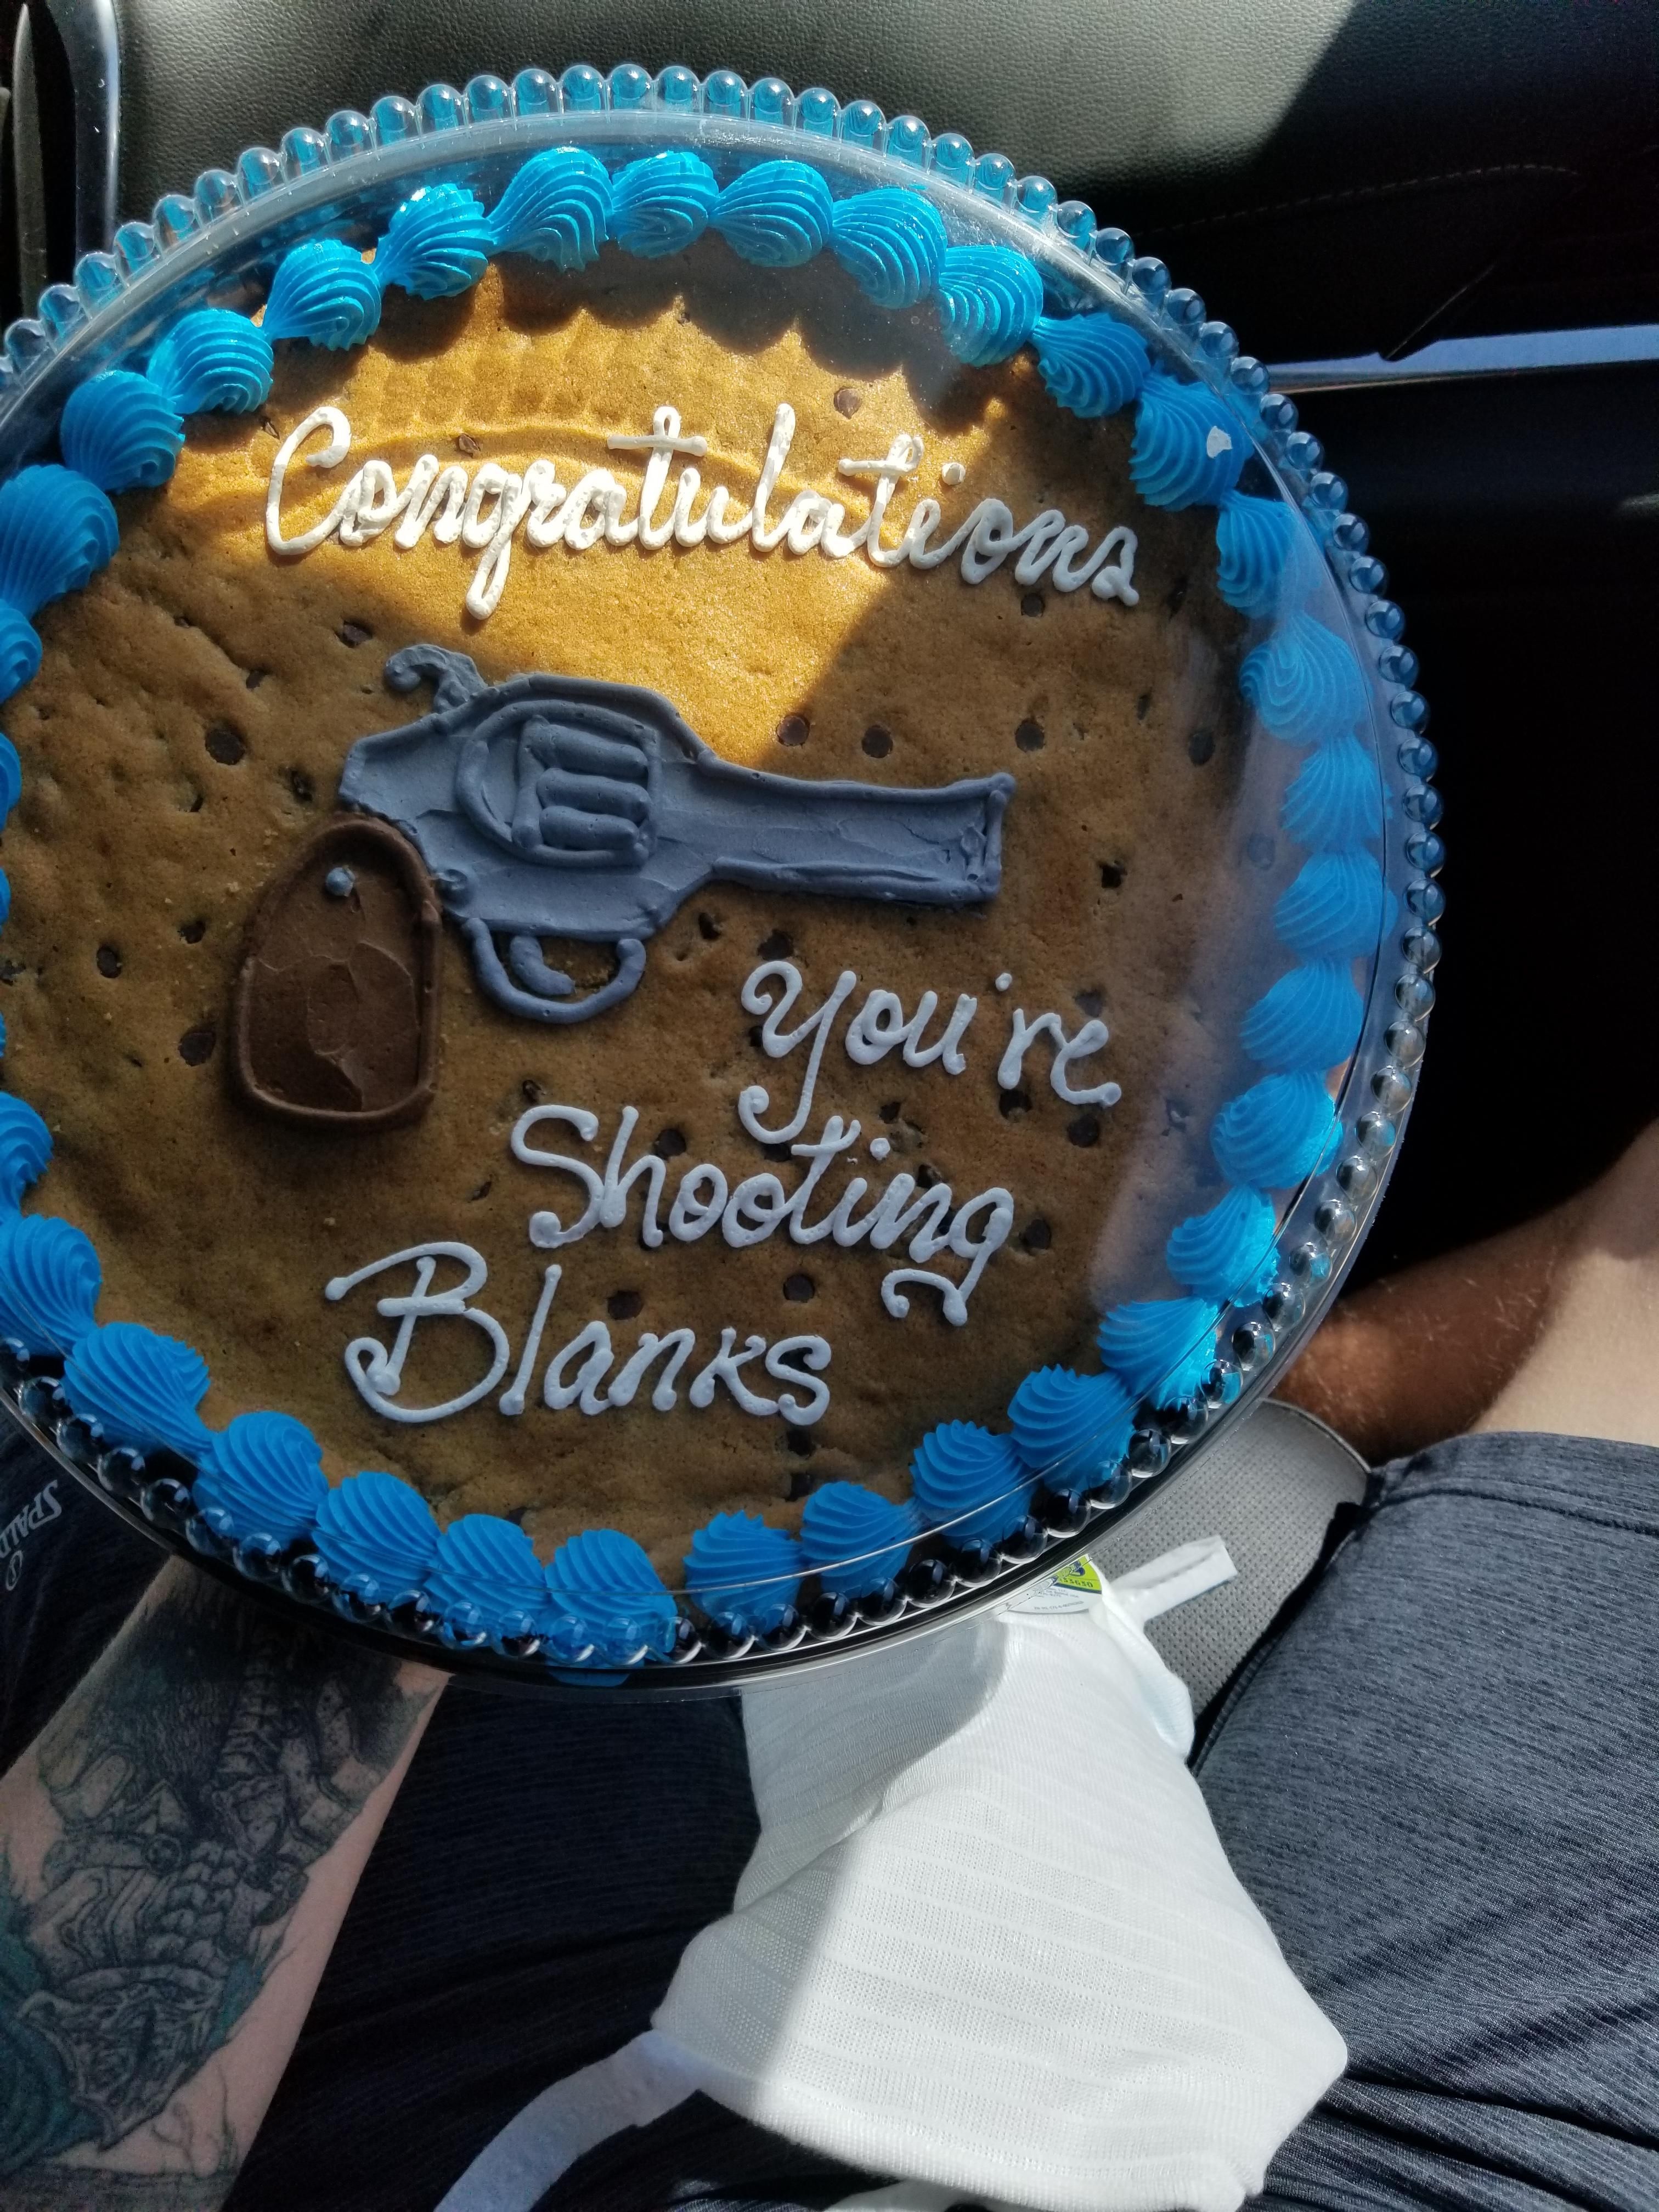 I just got a vasectomy today, my wife got me this to celebrate